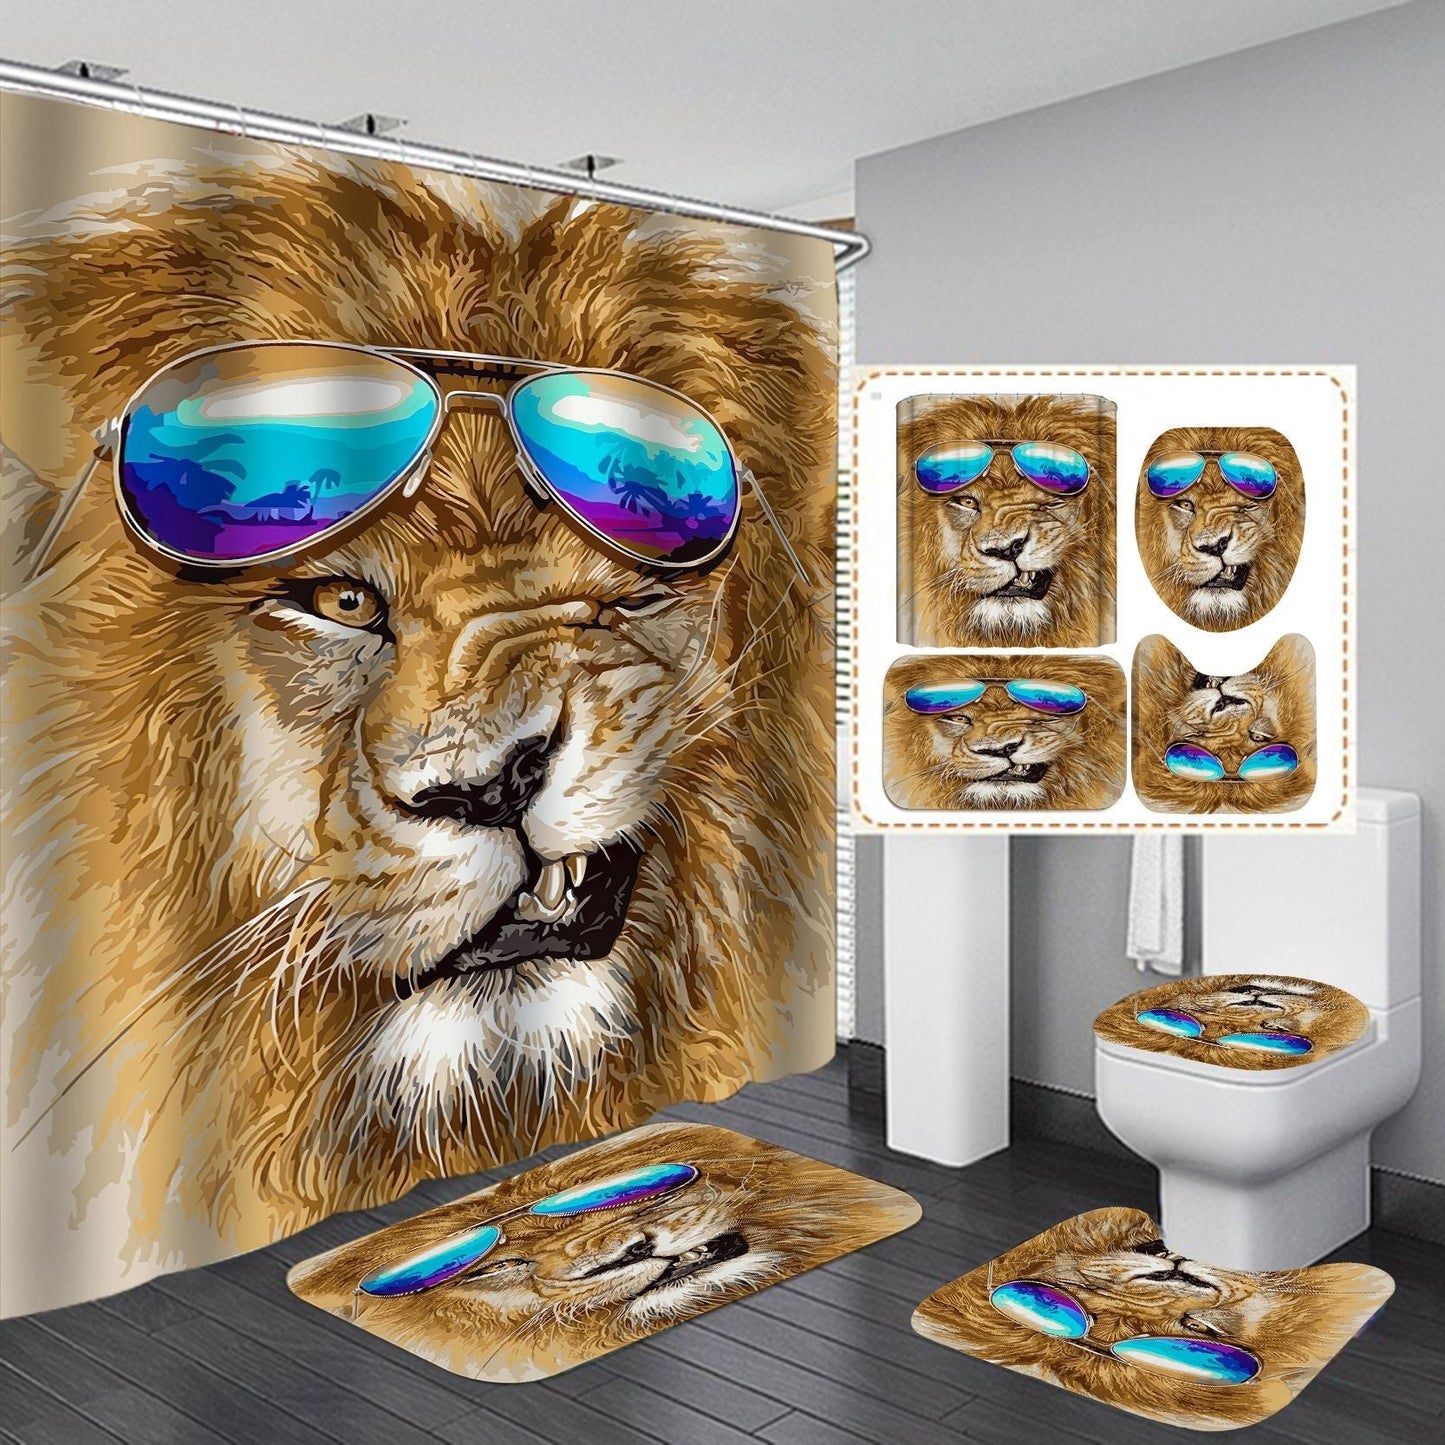 3D Lion Design Shower Curtain Bathroom SetsNon-Slip Toilet Lid Cover-Shower Curtain-180×180cm Shower Curtain Only-4-Free Shipping at meselling99